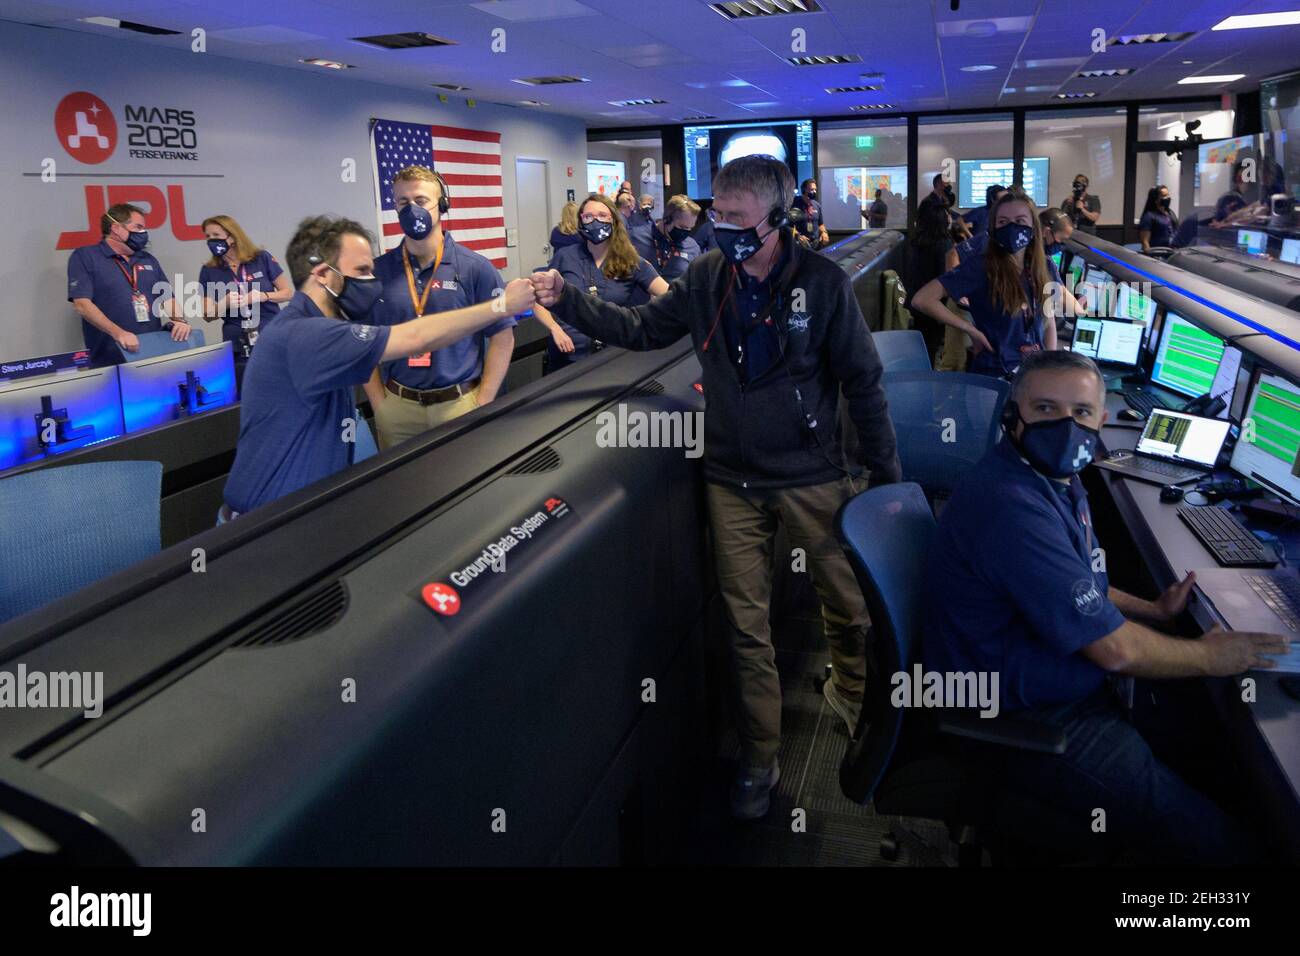 Pasadena, California. 18th Feb 2021. Members of NASA's Perseverance rover team react in mission control after receiving confirmation the spacecraft successfully touched down on Mars, on Thursday, February 18, 2021, at NASA's Jet Propulsion Laboratory in Pasadena, California. A key objective for Perseverance's mission on Mars is astrobiology, including the search for signs of ancient microbial life. Credit: UPI/Alamy Live News Stock Photo